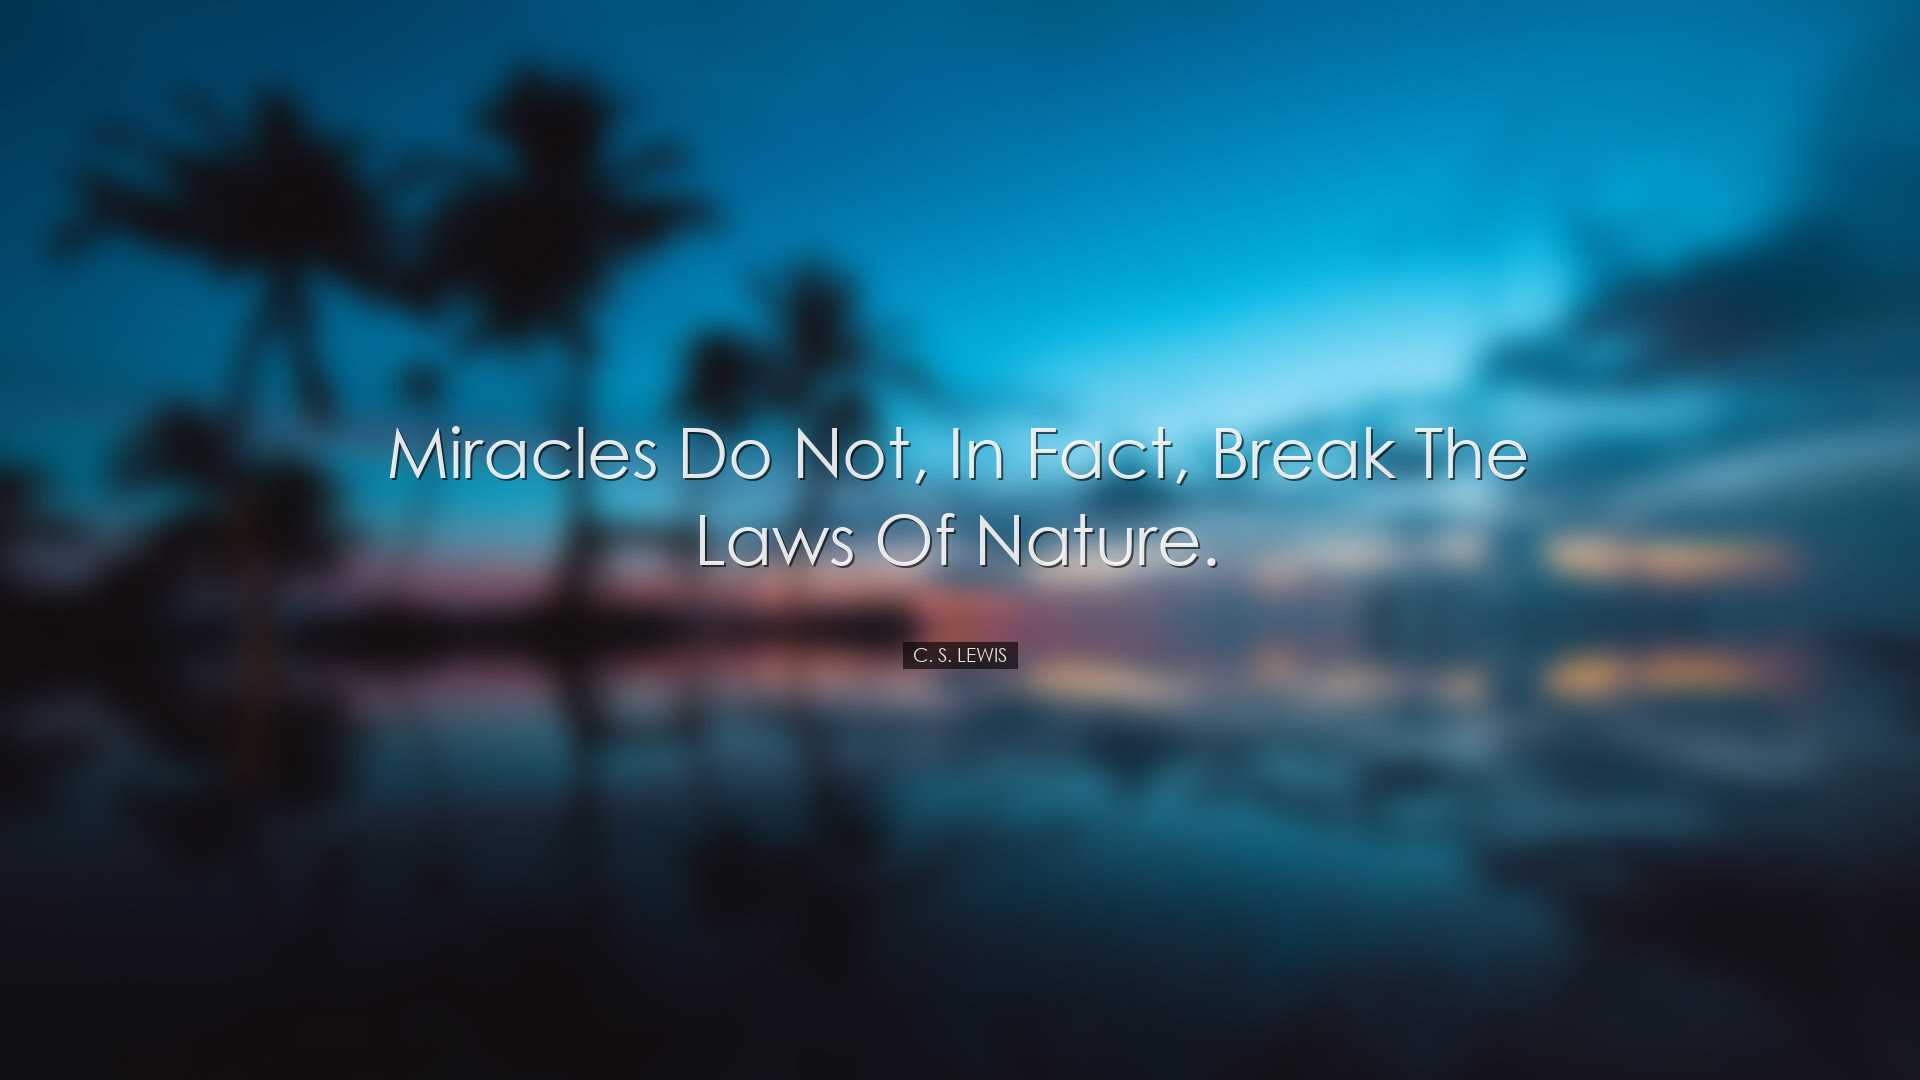 Miracles do not, in fact, break the laws of nature. - C. S. Lewis